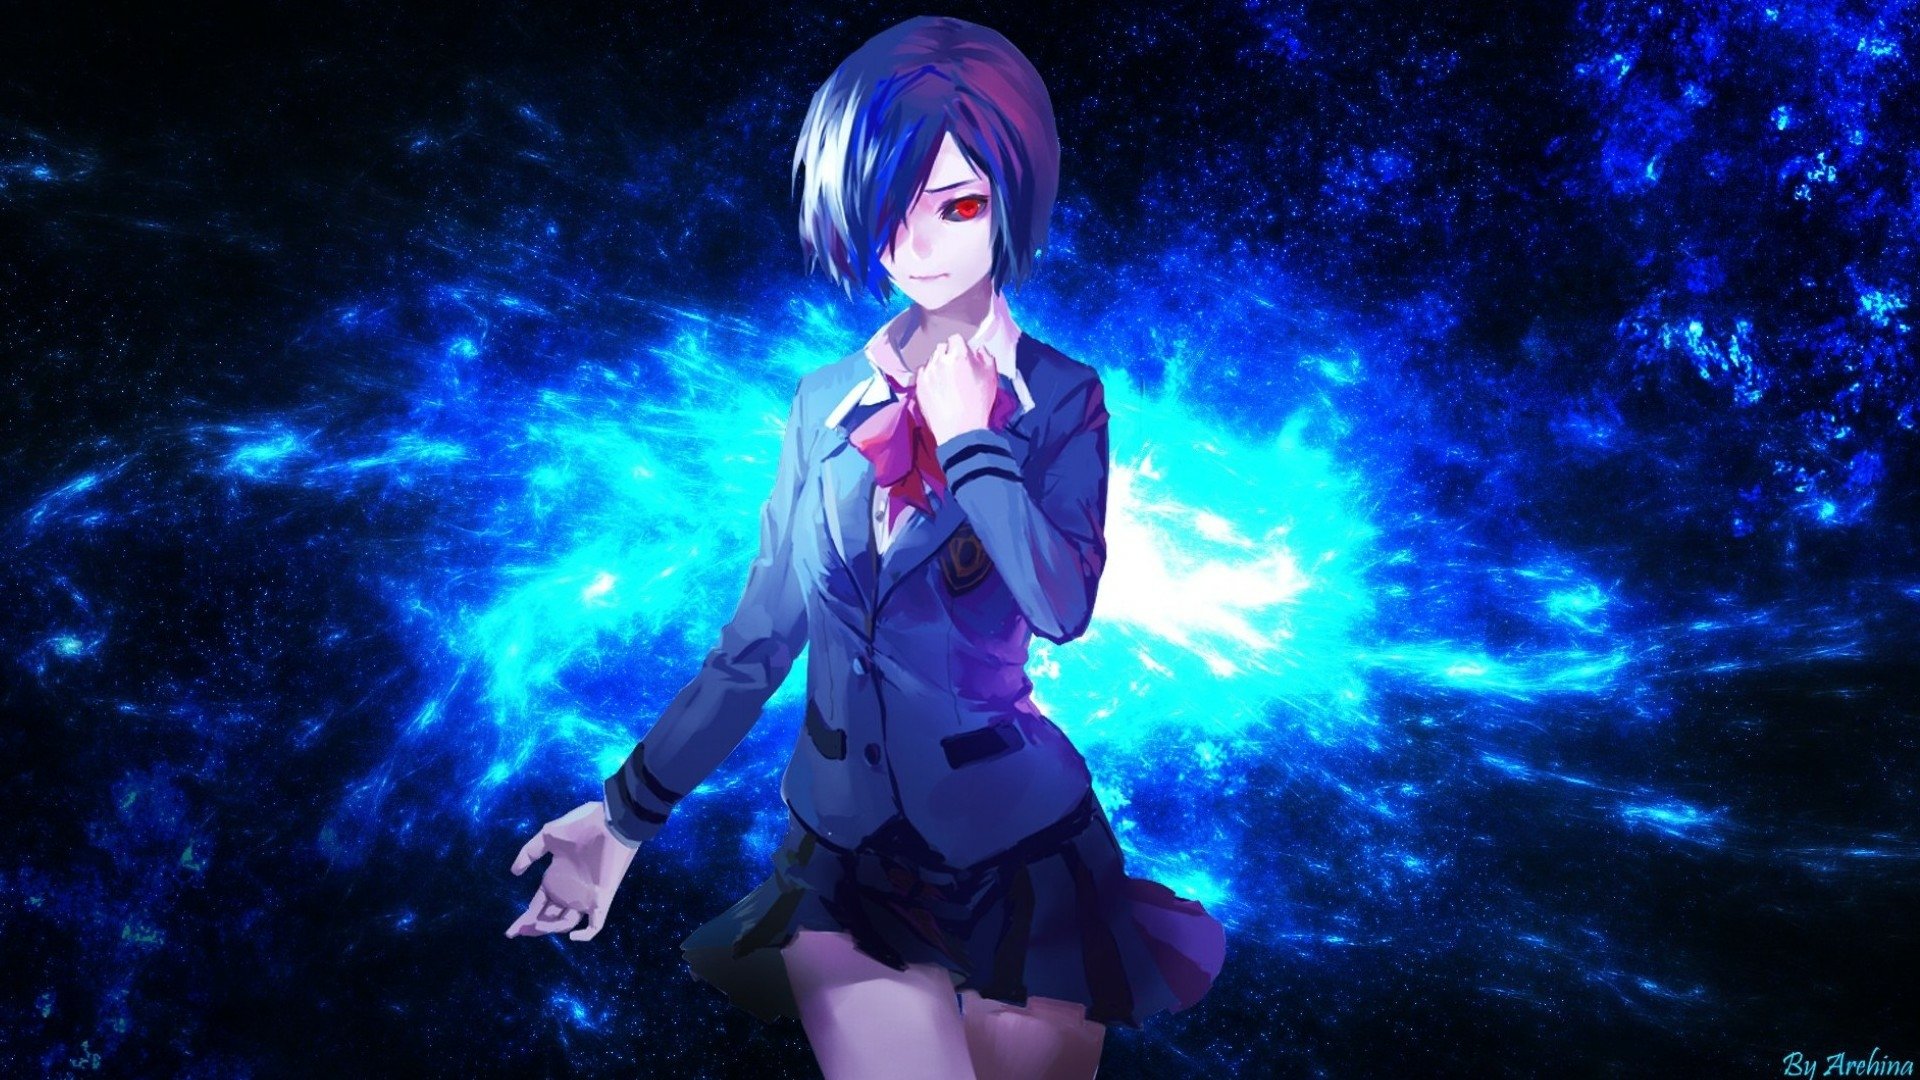 HD desktop wallpaper featuring Touka Kirishima from Tokyo Ghoul, in a uniform with a skirt and bow, showcasing purple hair and red eyes against a cosmic blue background.